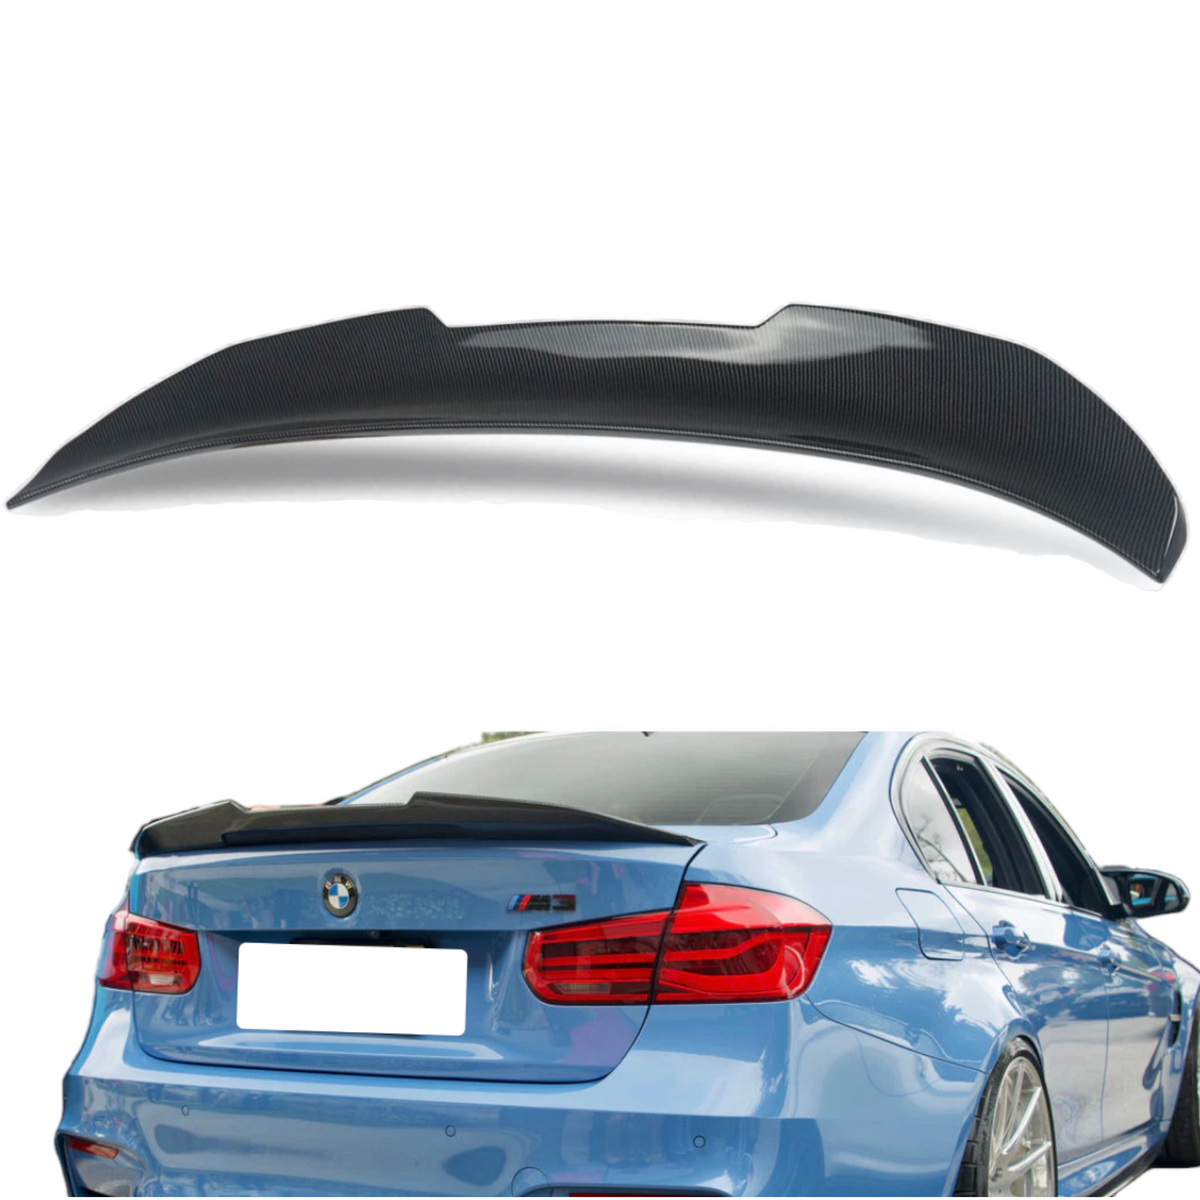 Boot Spoiler - High Kick - V Style - Fits BMW F30 F80 3 Series - Carbon Look